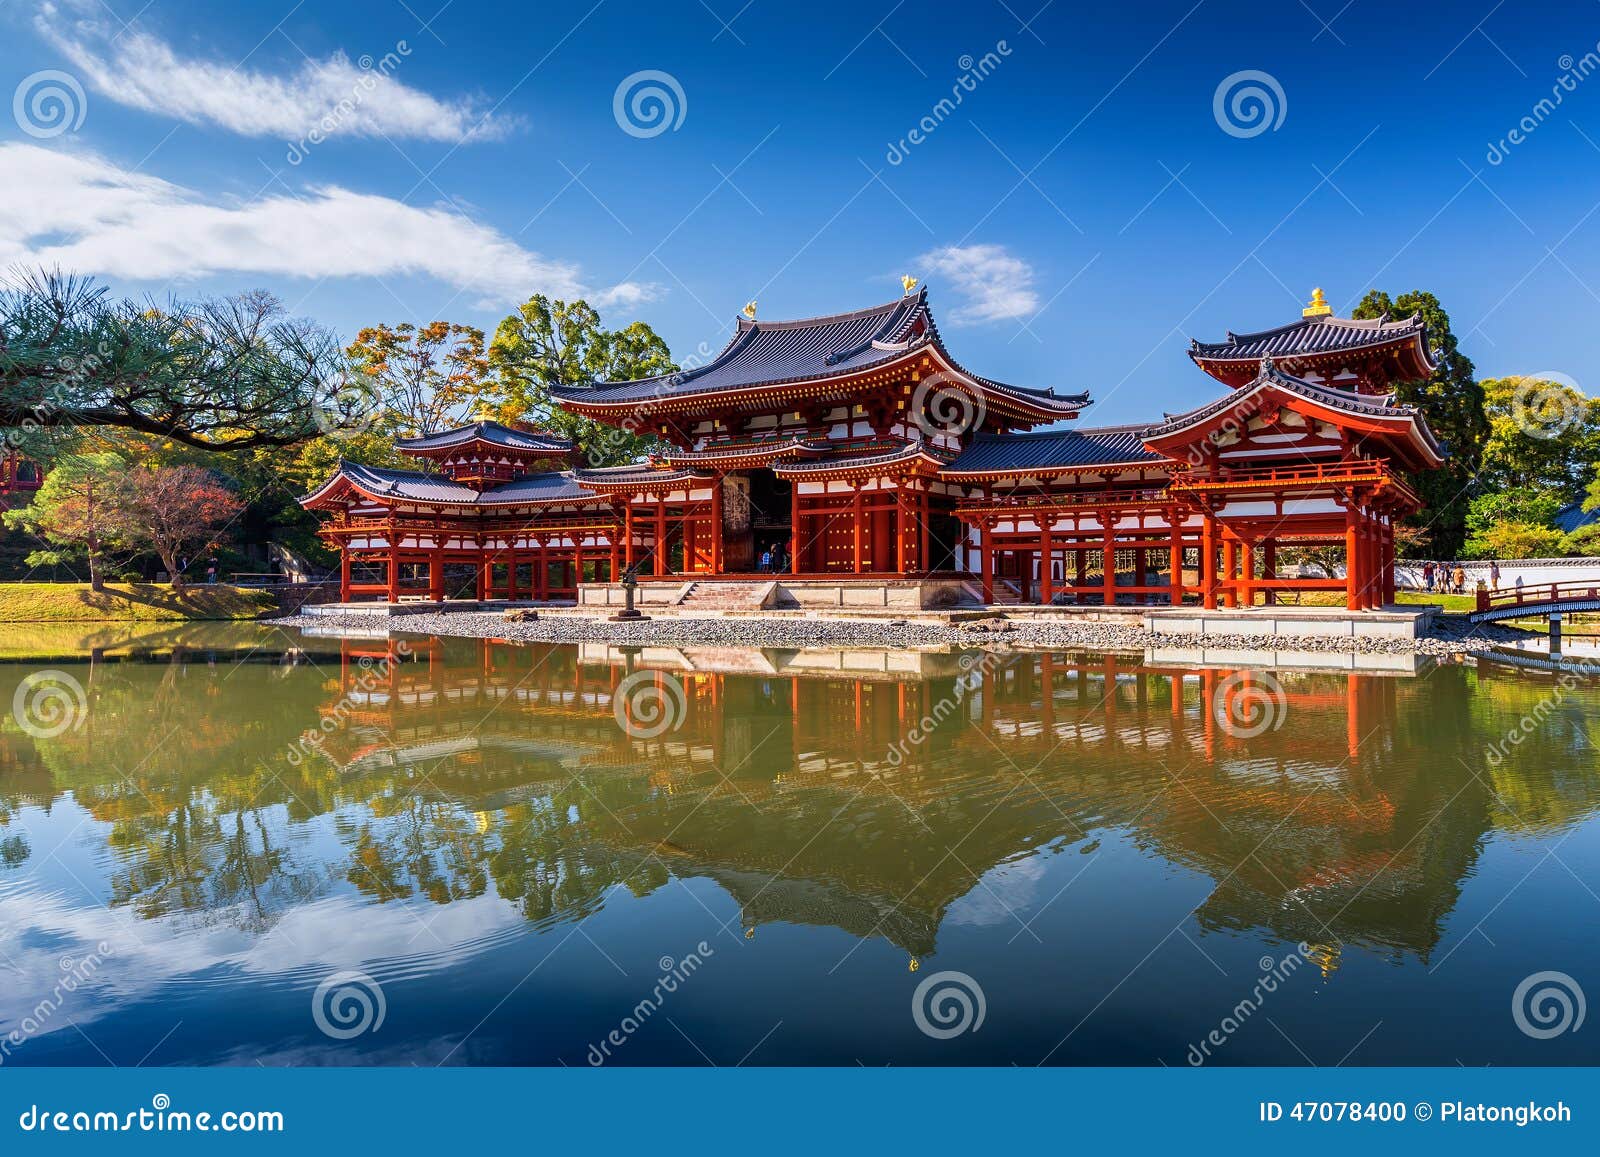 uji, kyoto, japan - famous byodo-in buddhist temple.